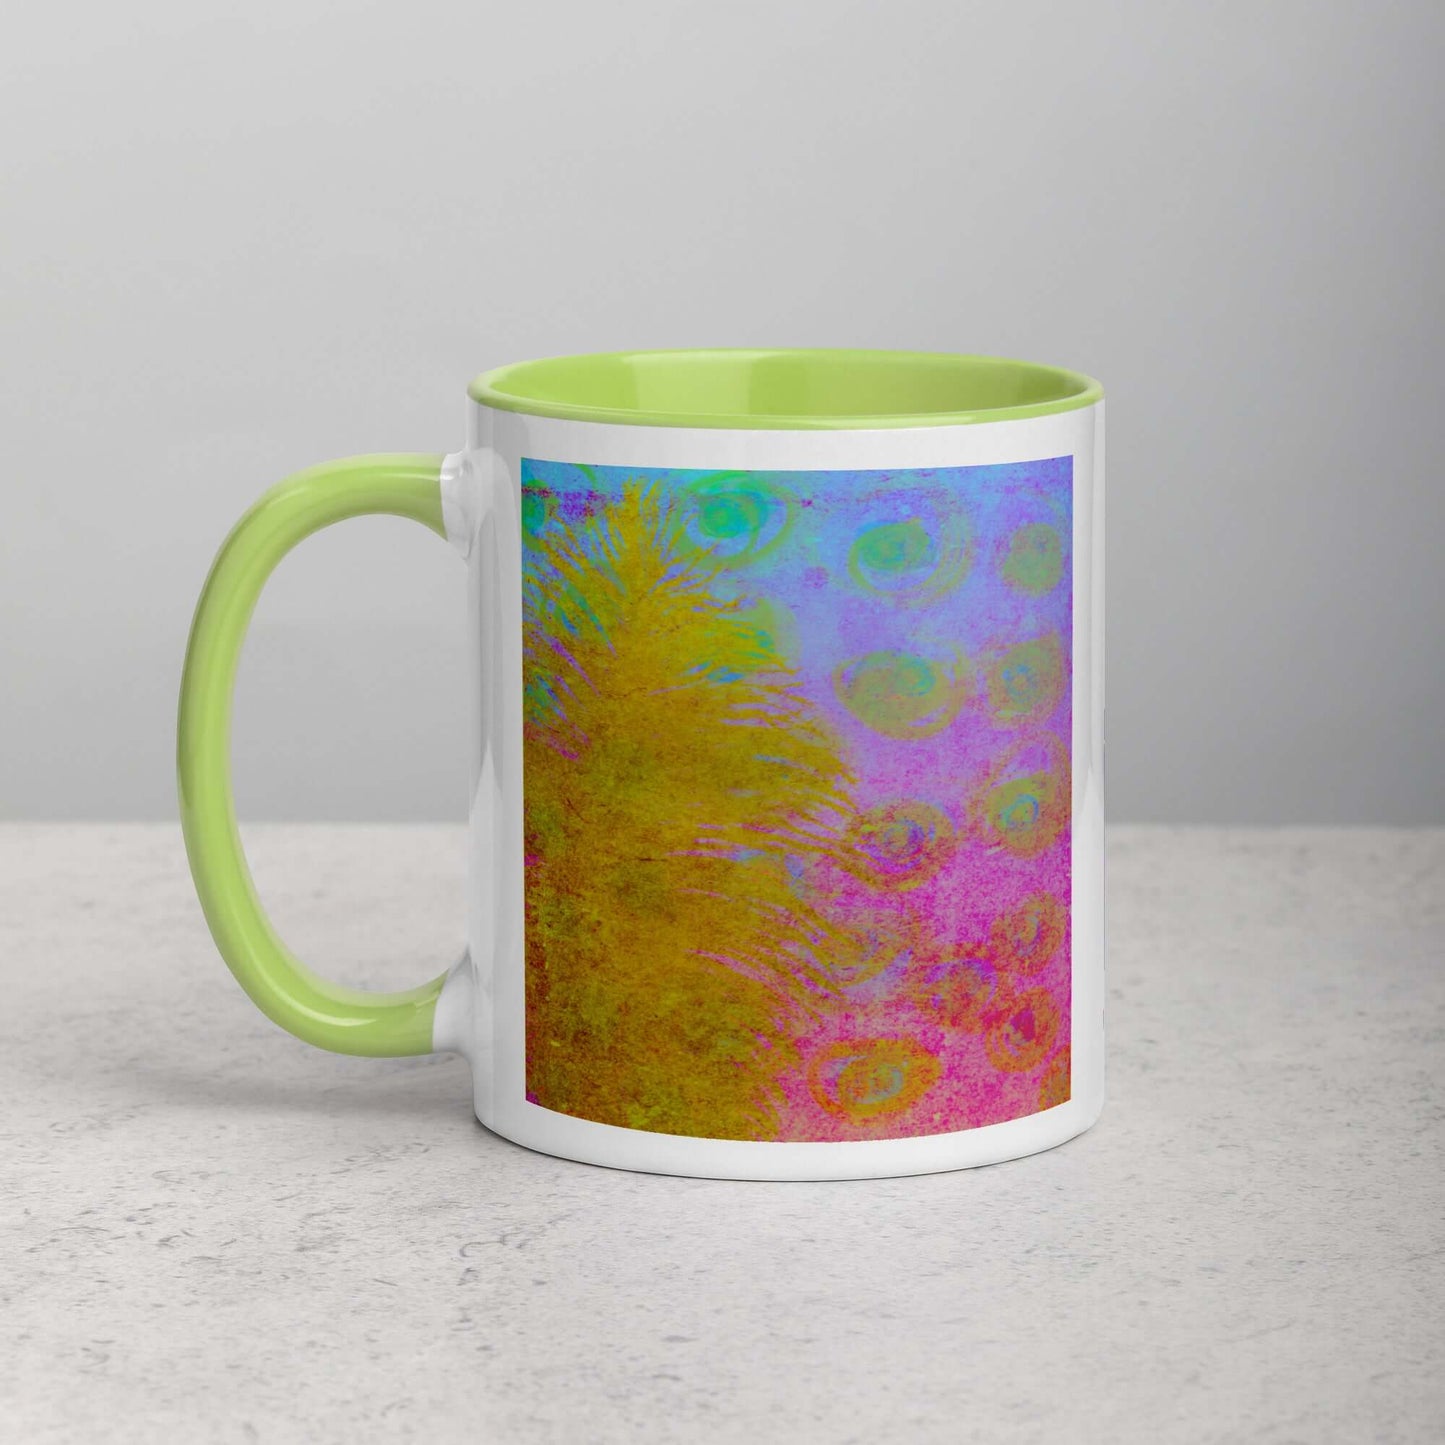 Golden Feather Pink and Blue “Fantasia” Abstract Art Mug with Lime Green Color Inside Left Handed Front View